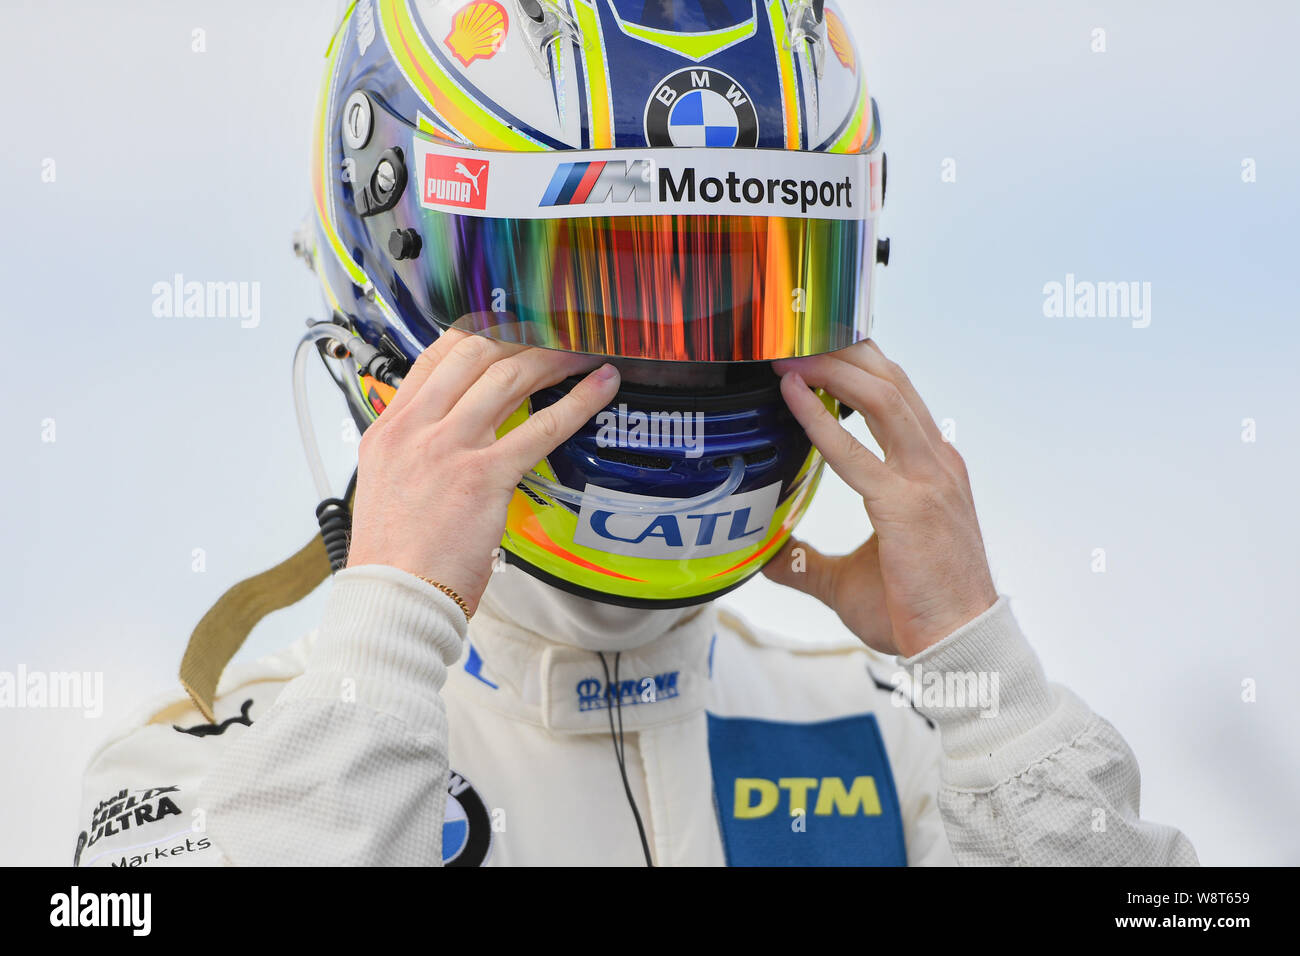 Kent, UK. 11th August 2019. Joel Eriksson (BMW Team RBM) gets ready during DTM Race 2 of the DTM (German Touring Cars) and W Series at Brands Hatch GP Circuit on Sunday, August 11, 2019 in KENT, ENGLAND. Credit: Taka G Wu/Alamy Live News Credit: Taka Wu/Alamy Live News Stock Photo